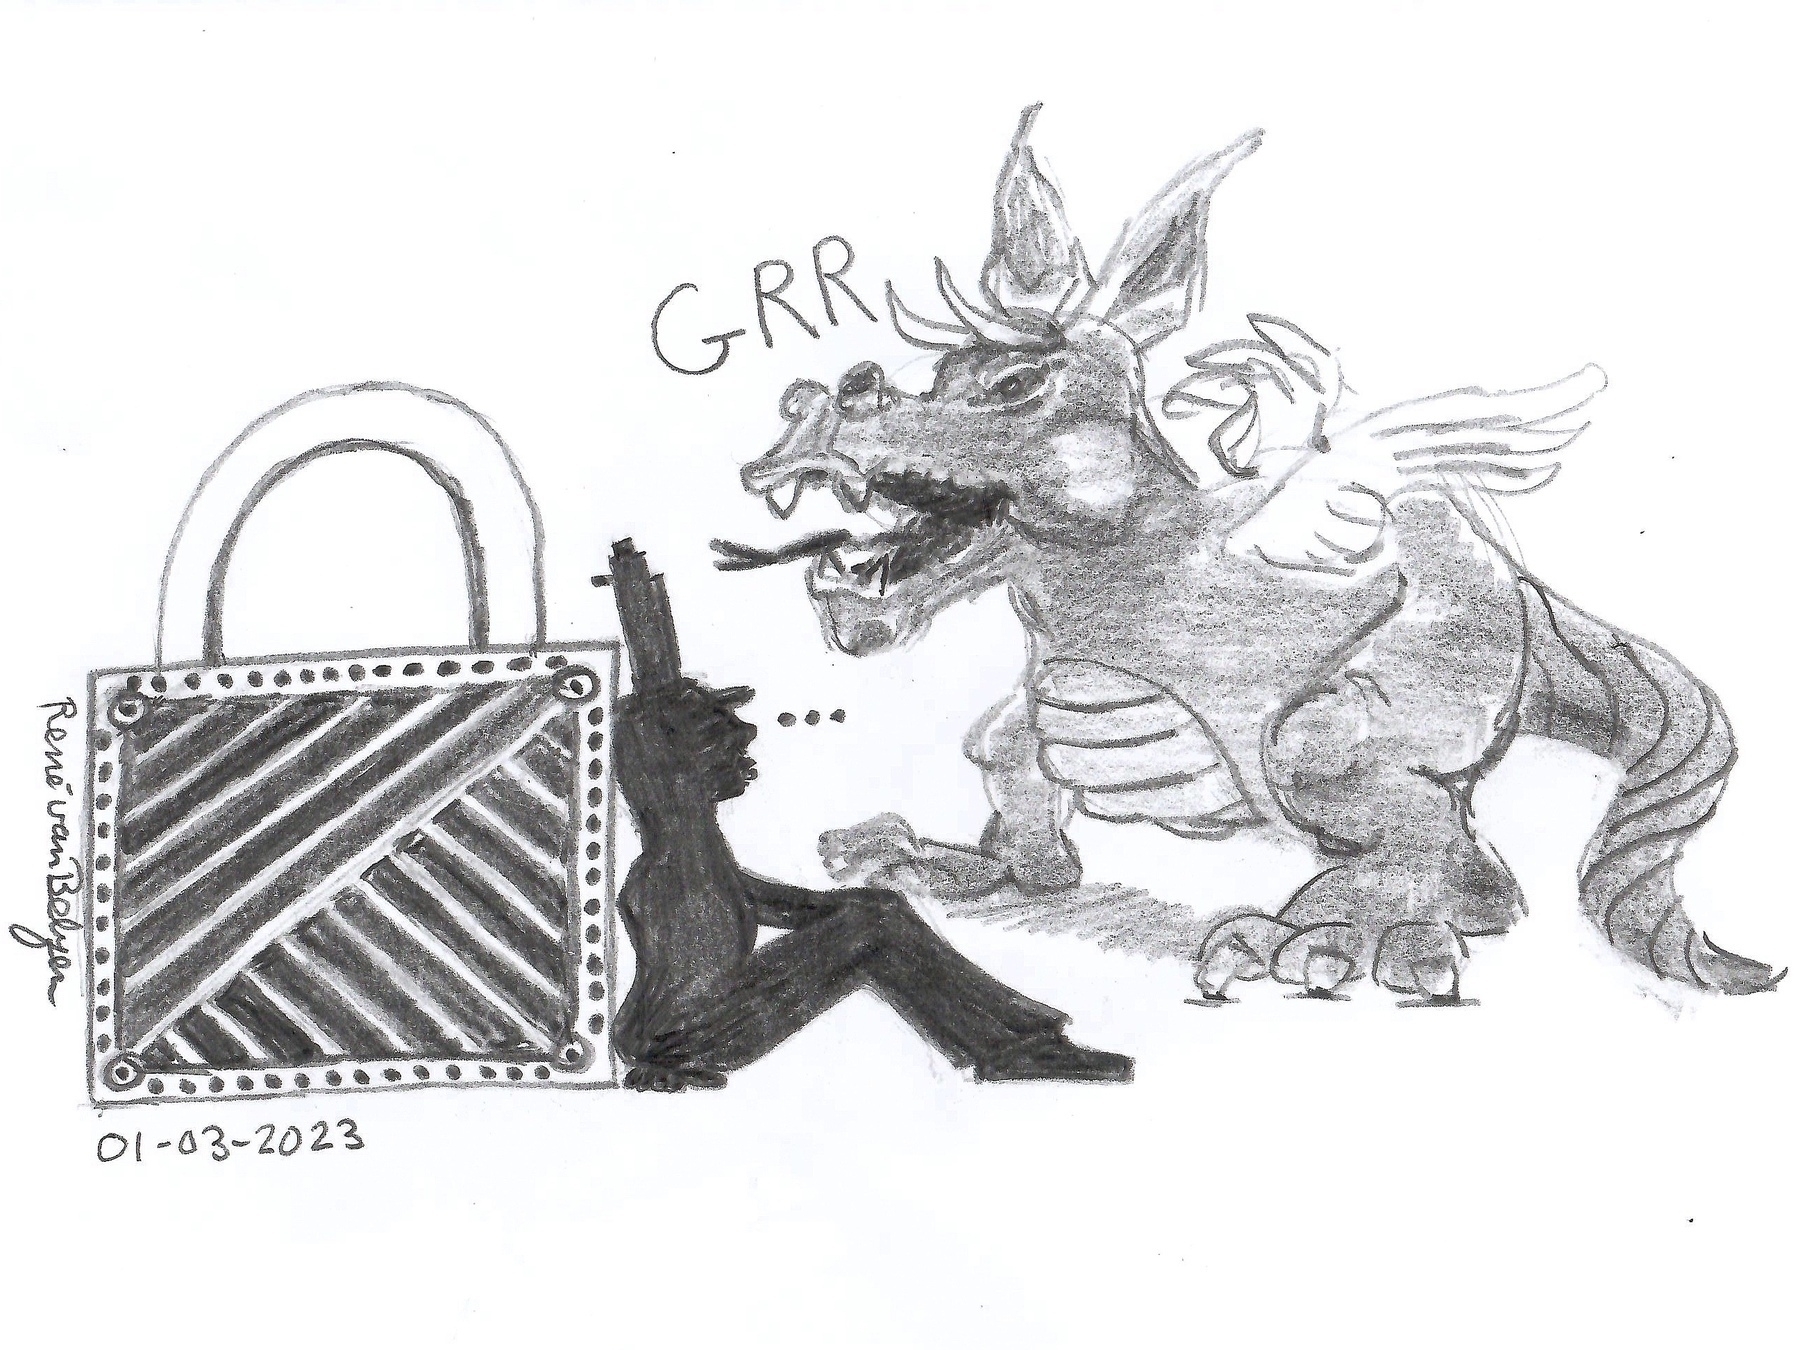 This is my contribution to the micro.blog challenge for March 1, secure. It is a photo of a pencil-on-paper drawing of a lock and a guard threatened by a dragon. #mbmar